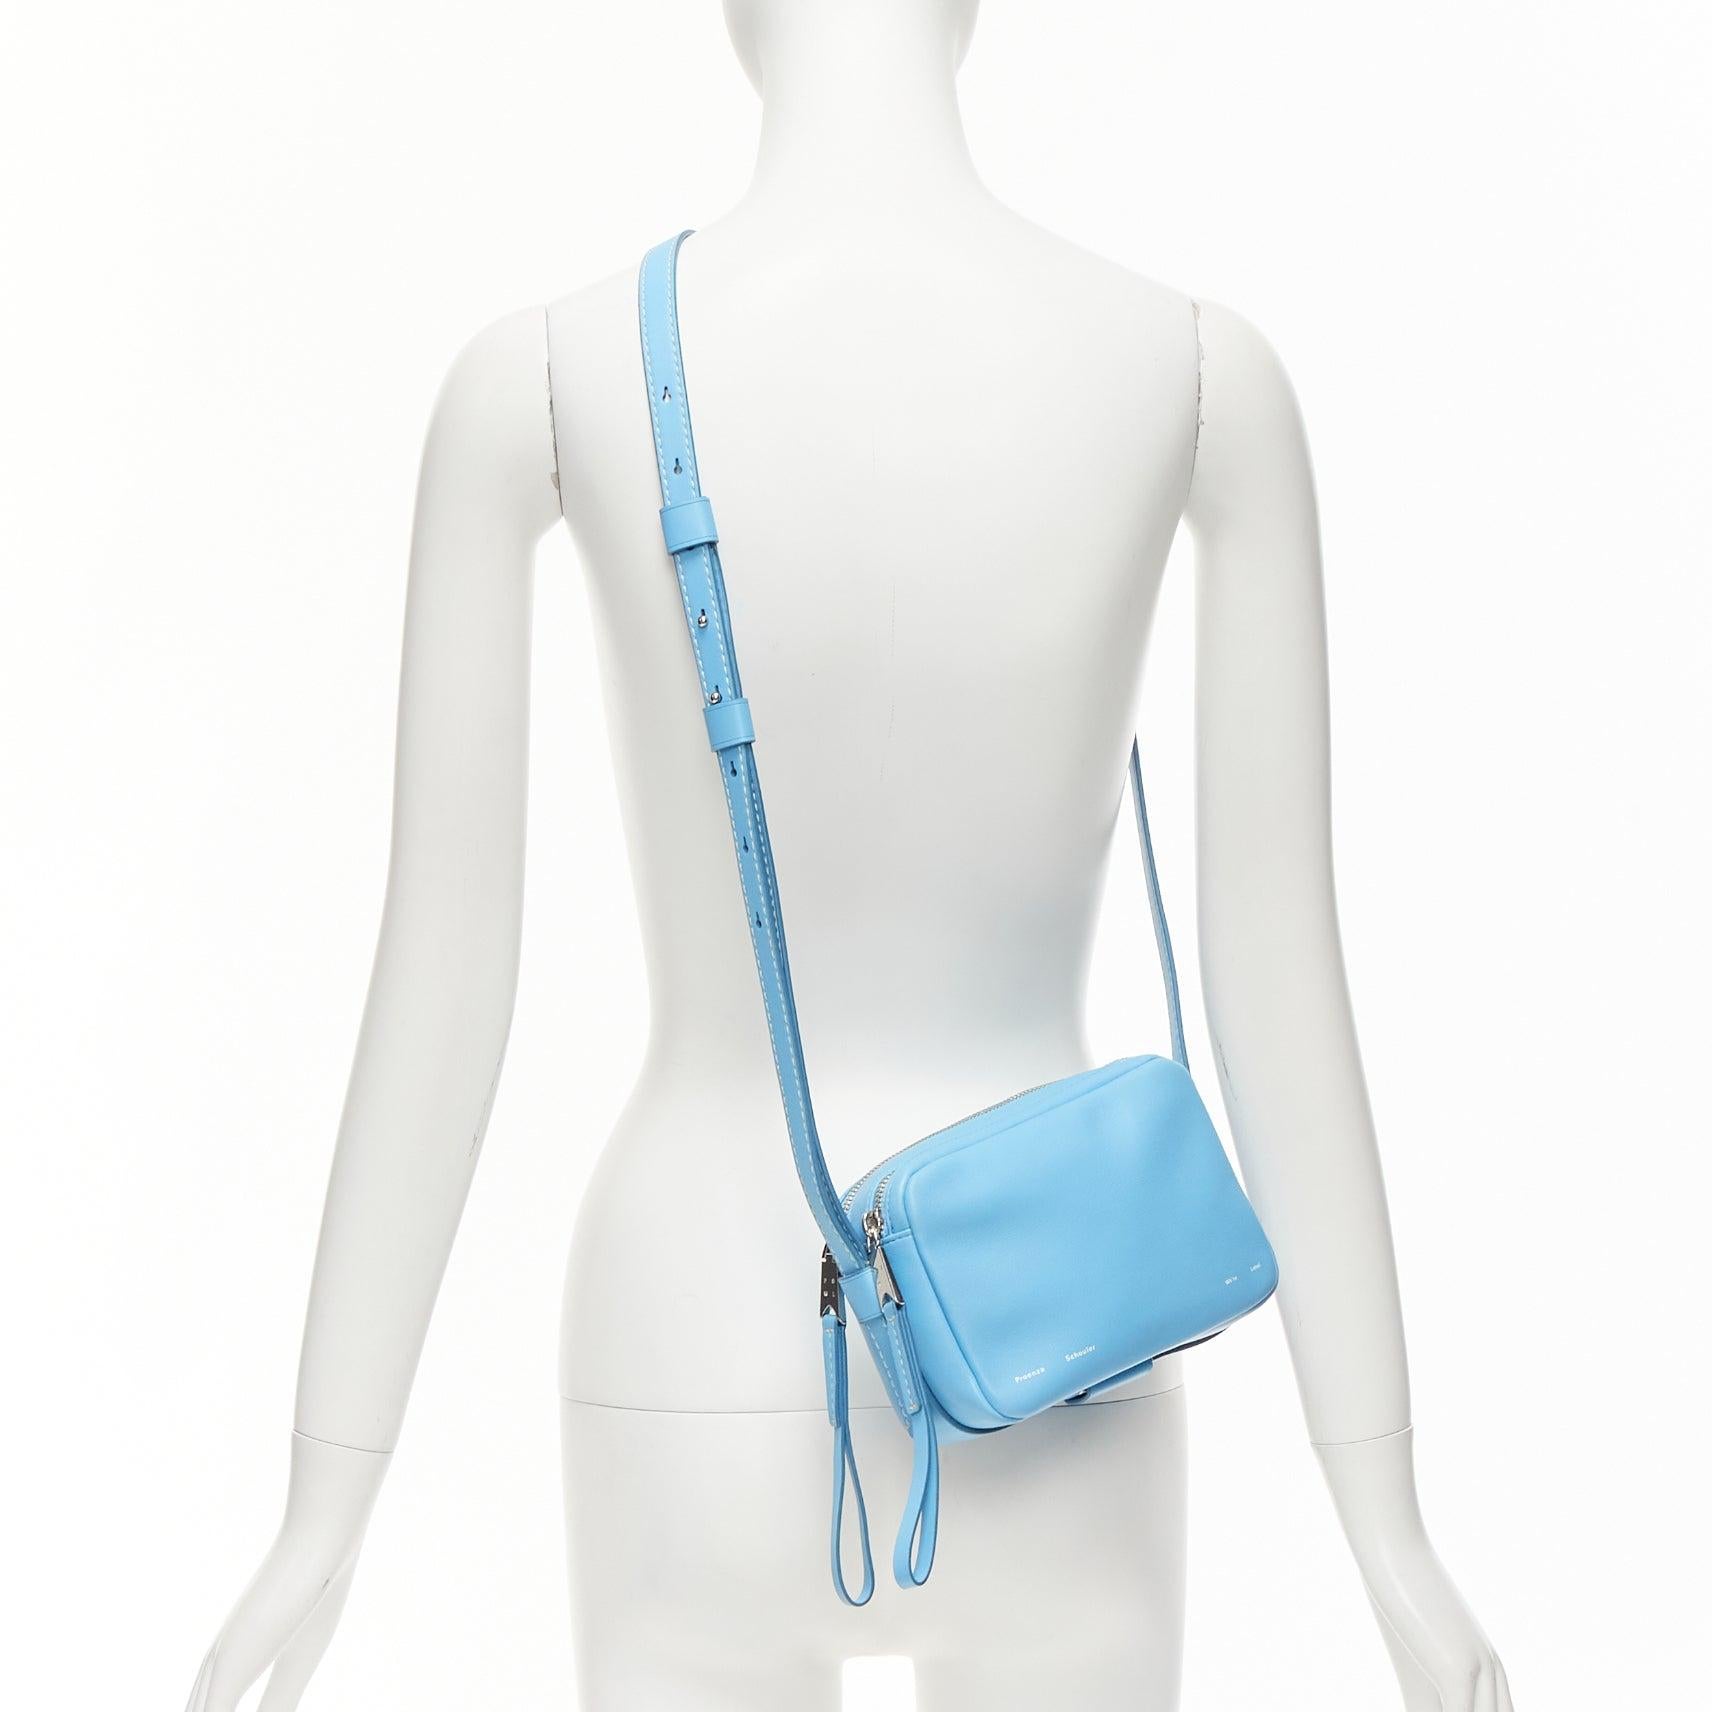 PROENZA SCHOULER White Label blue leather silver zipper logo crossbody camera bag
Reference: KYCG/A00030
Brand: Proenza Schouler
Collection: White Label
Material: Leather
Color: Blue
Pattern: Solid
Closure: Zip
Lining: Black